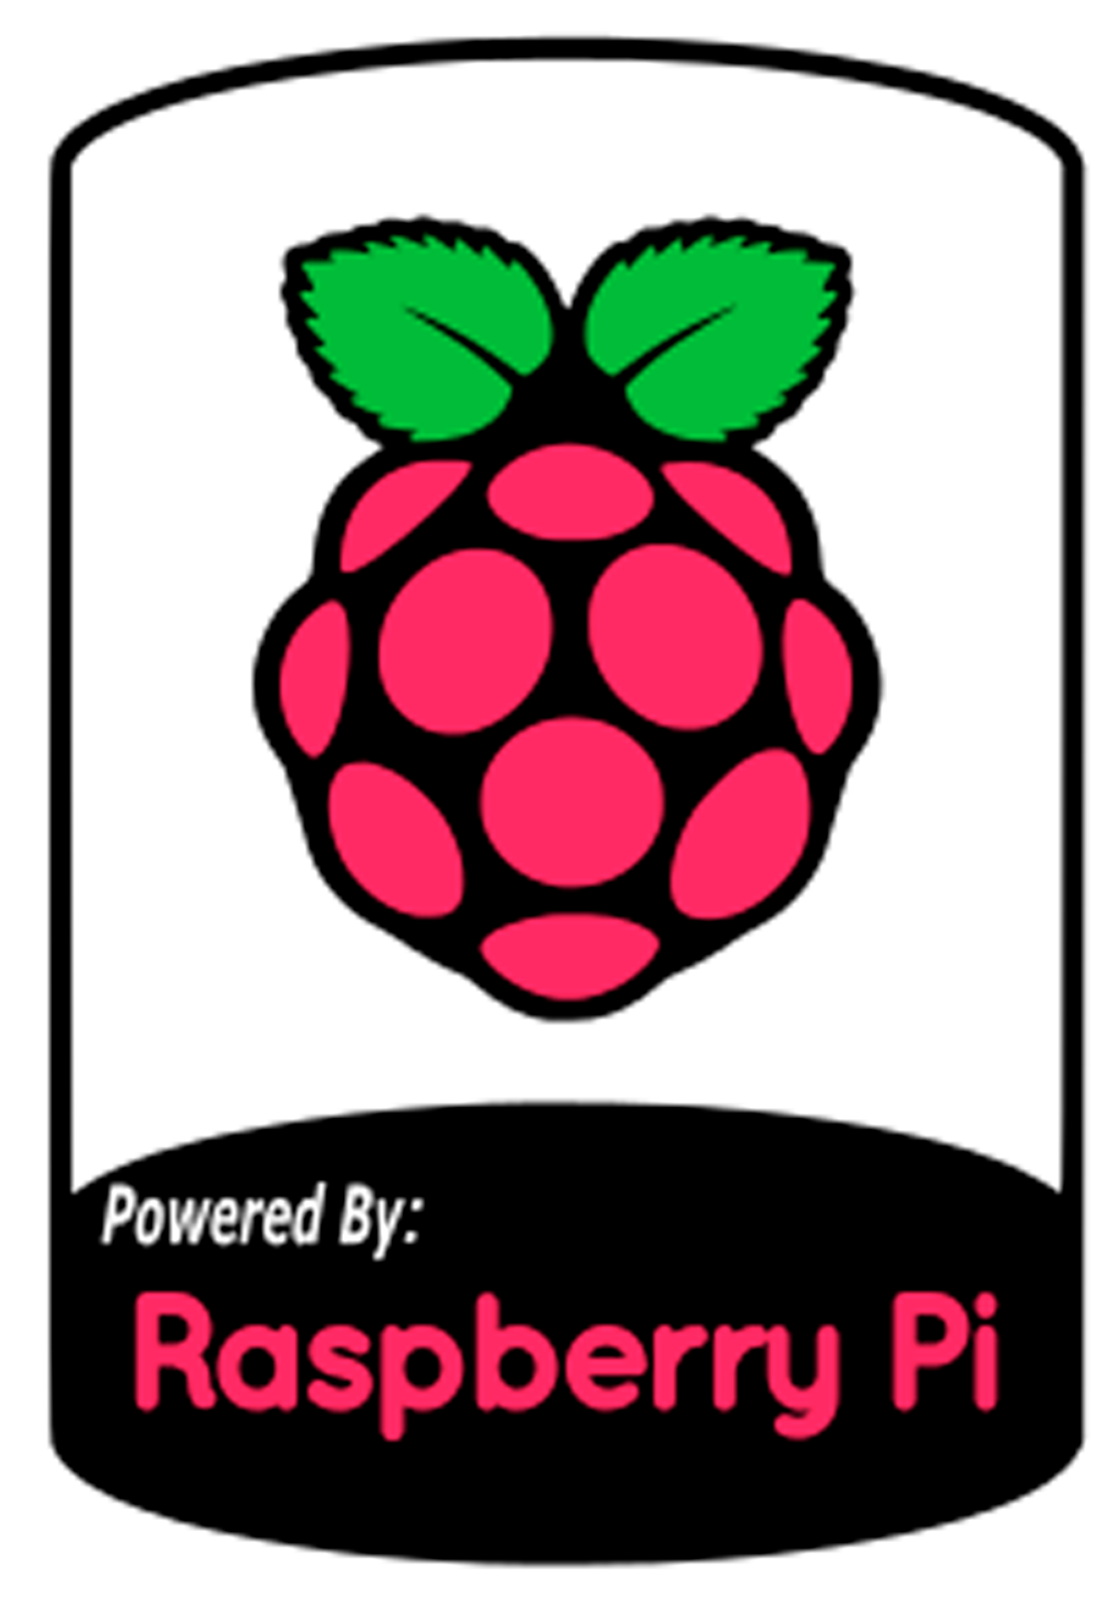 Car Powered By Raspberry Pi Wall or Case Decal Sticker Cool Bumper Sticker 